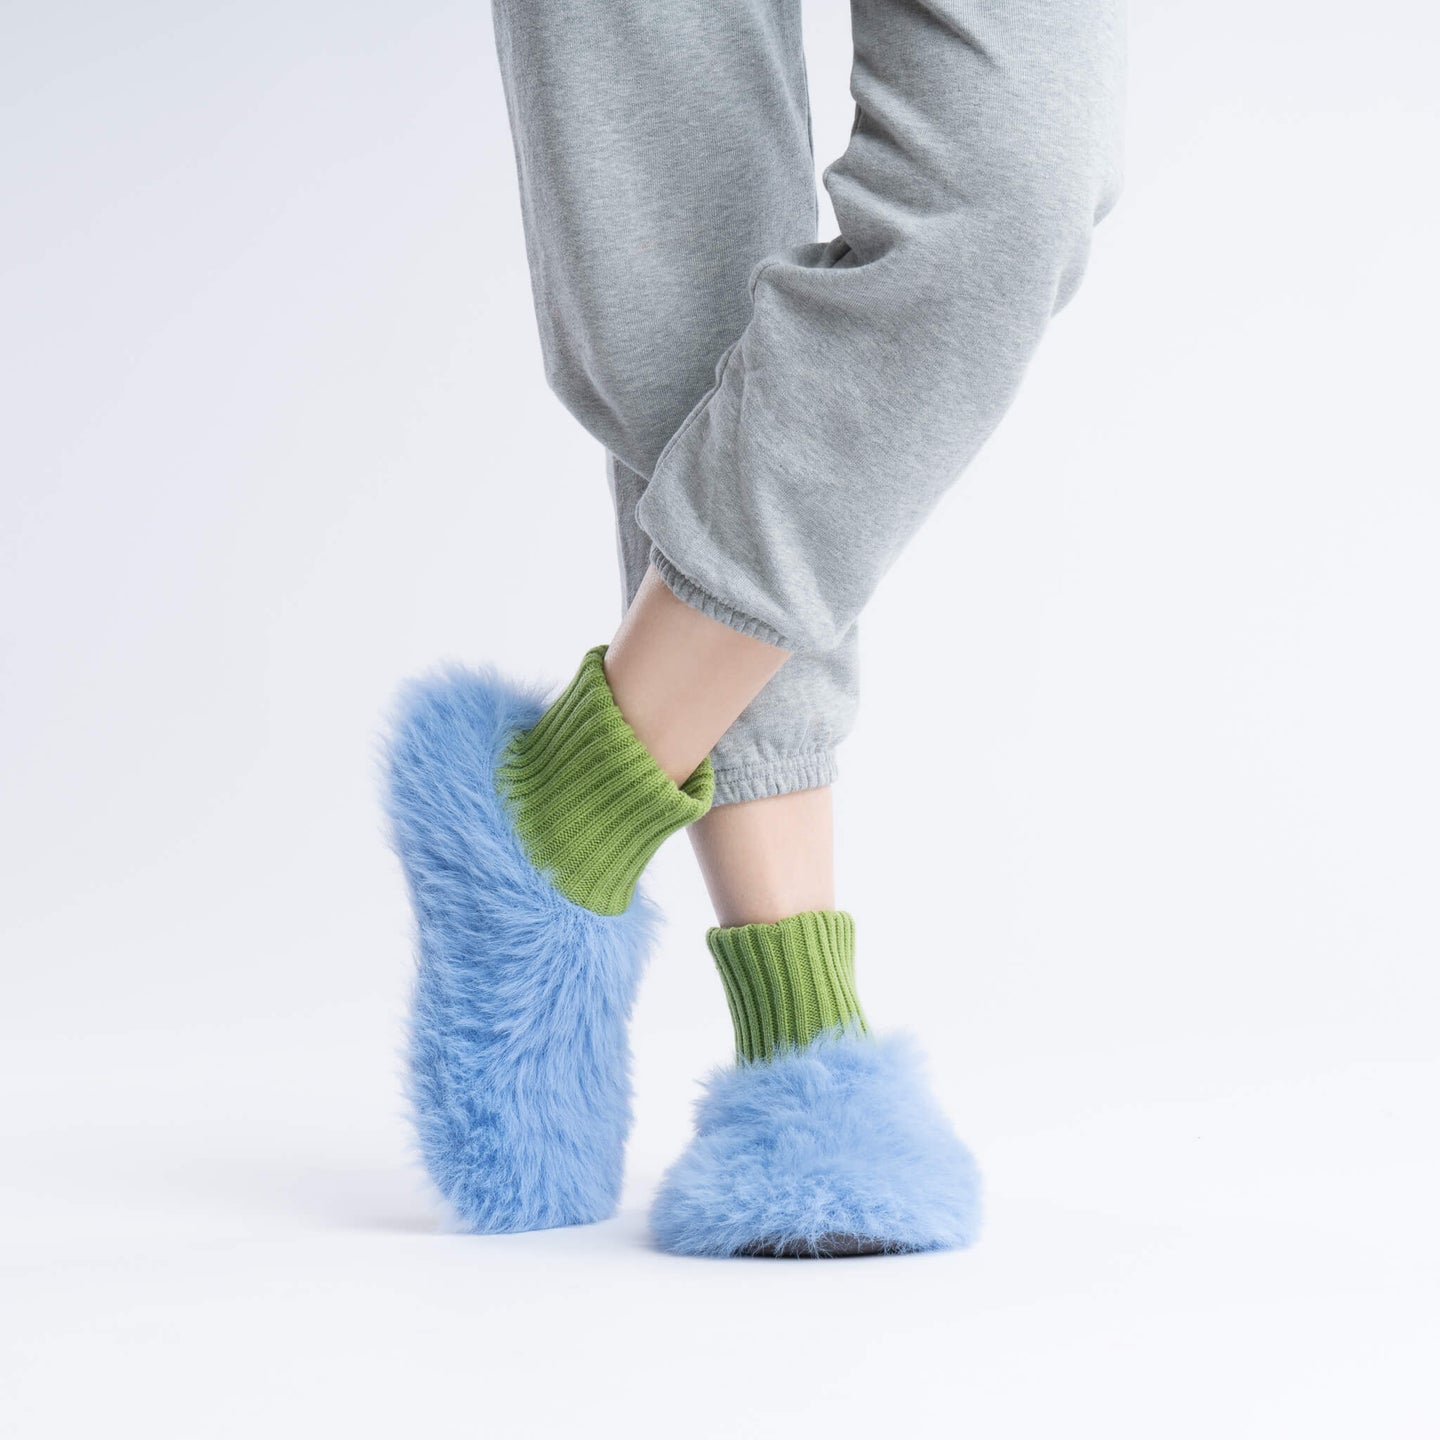 Furry Fuzzy Sock Slippers Monster Muppet Booties Warm Fuzzy Slippers